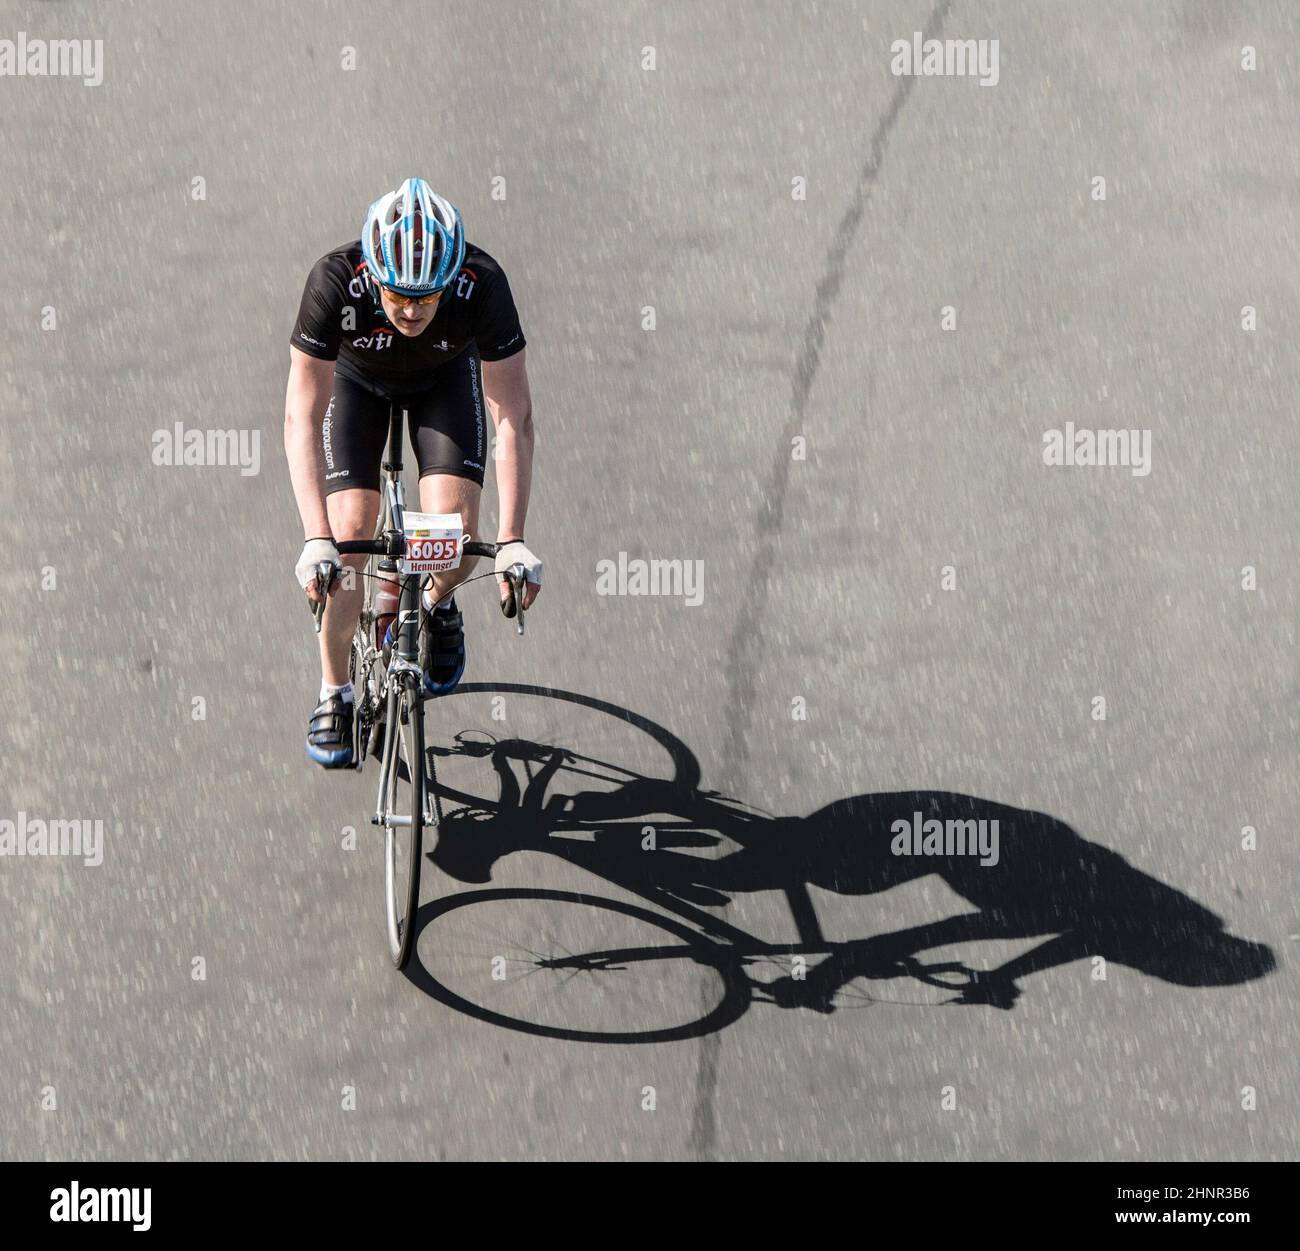 racing cyclist at famous cycle race Rund um den Henninger Turm Stock Photo